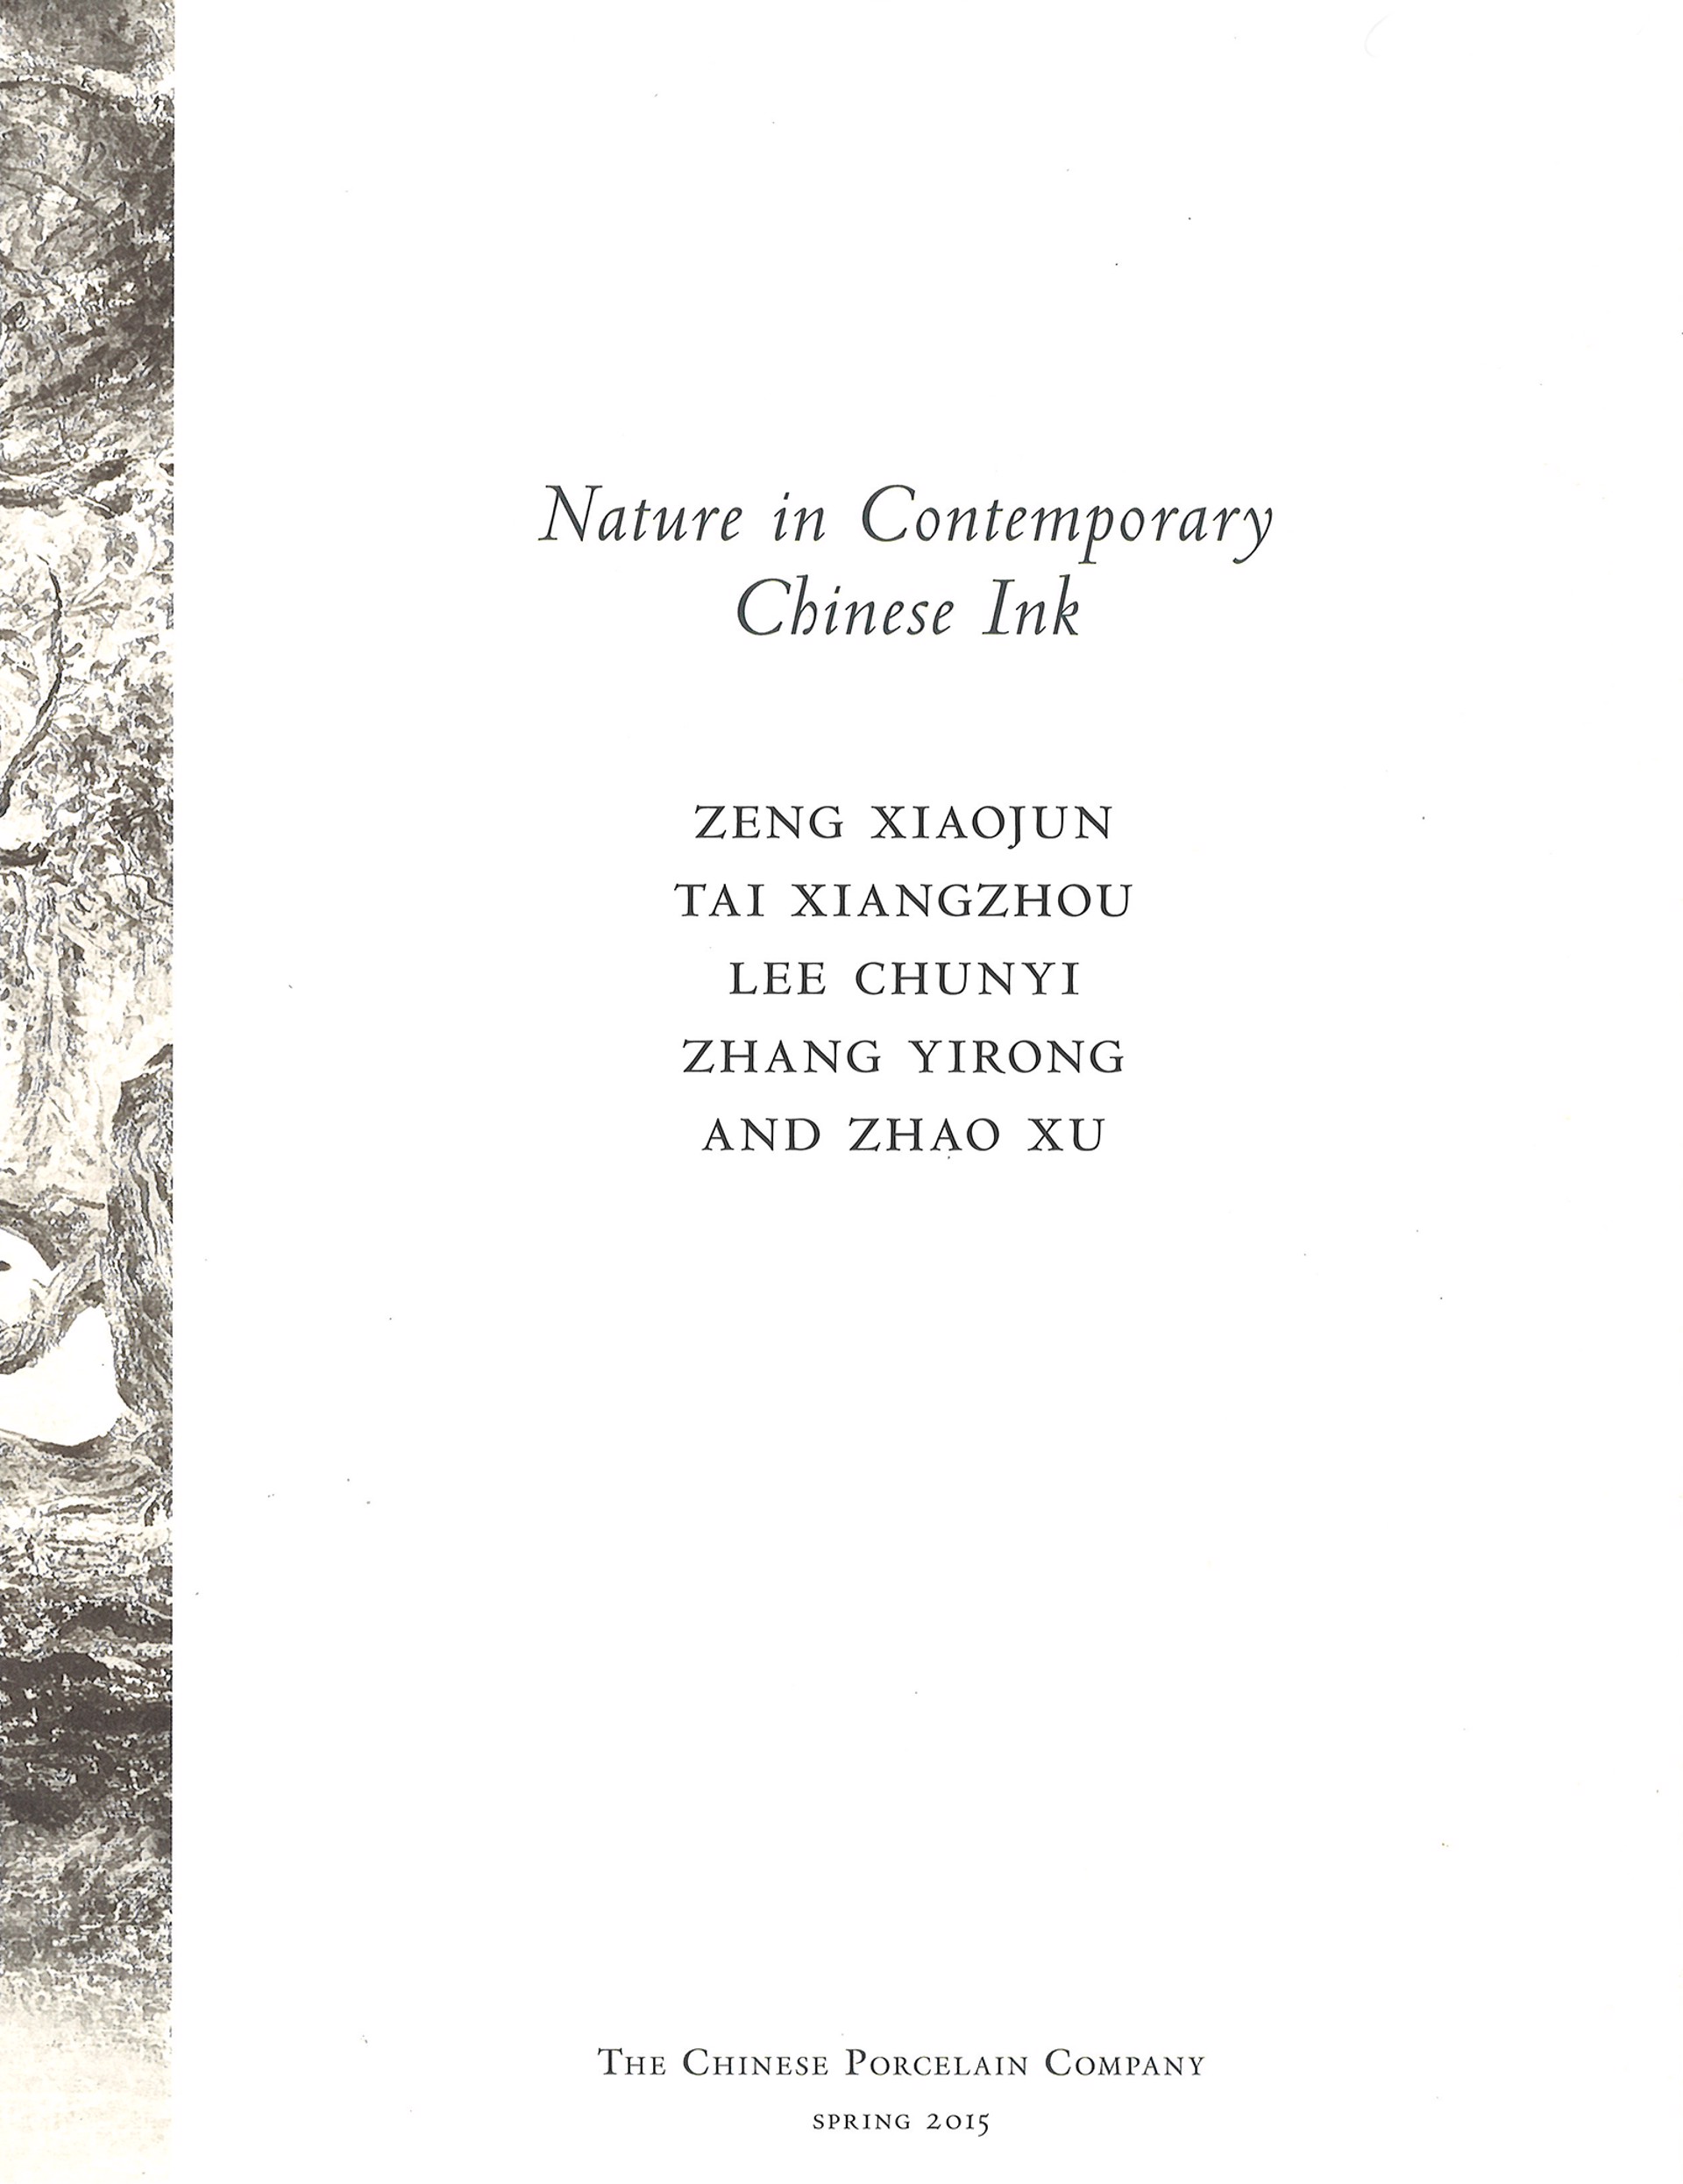 Nature in Contemporary Chinese Ink (out of print) by Brochure 19